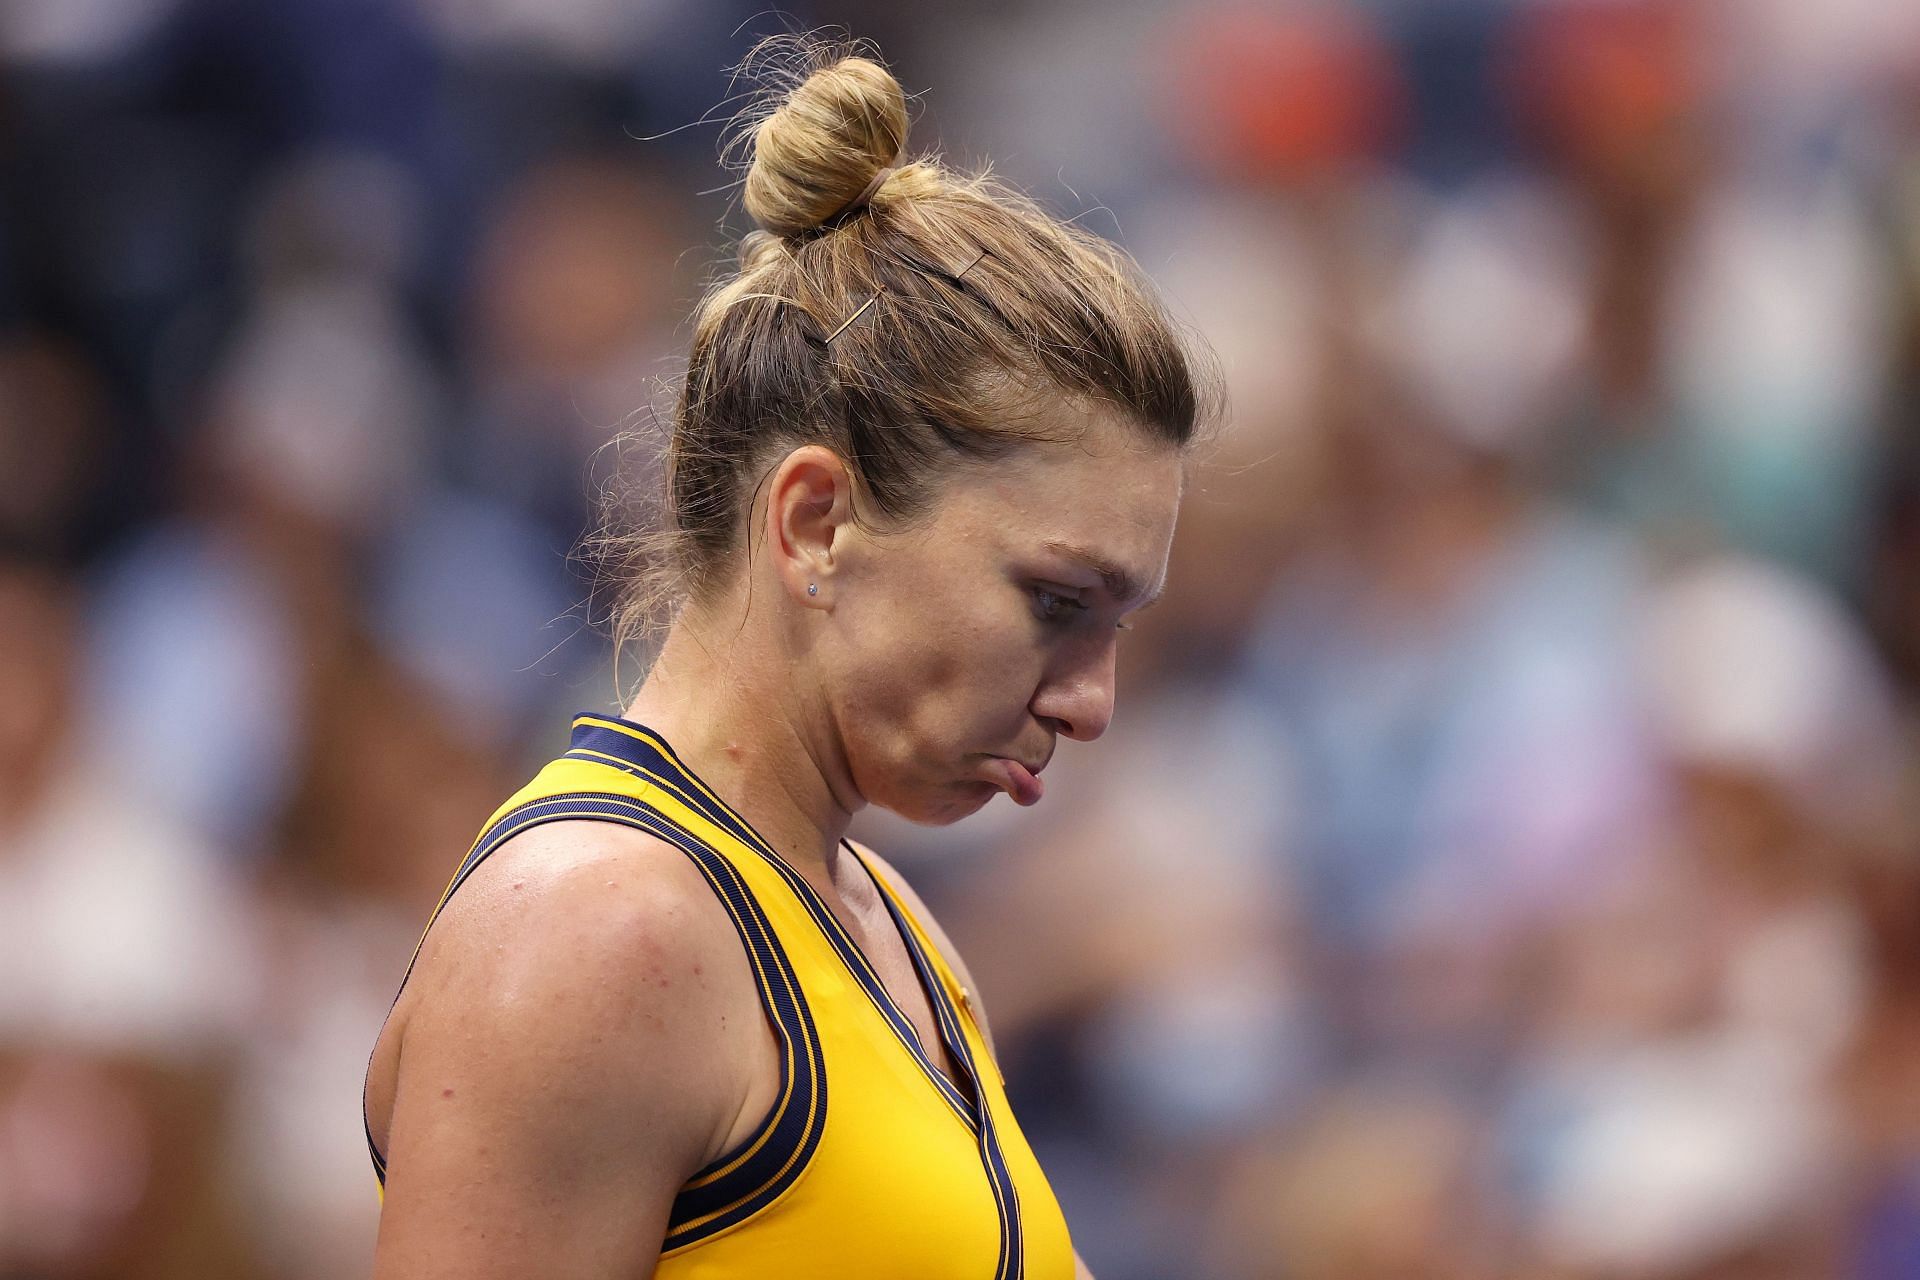 Simona Halep at the US Open